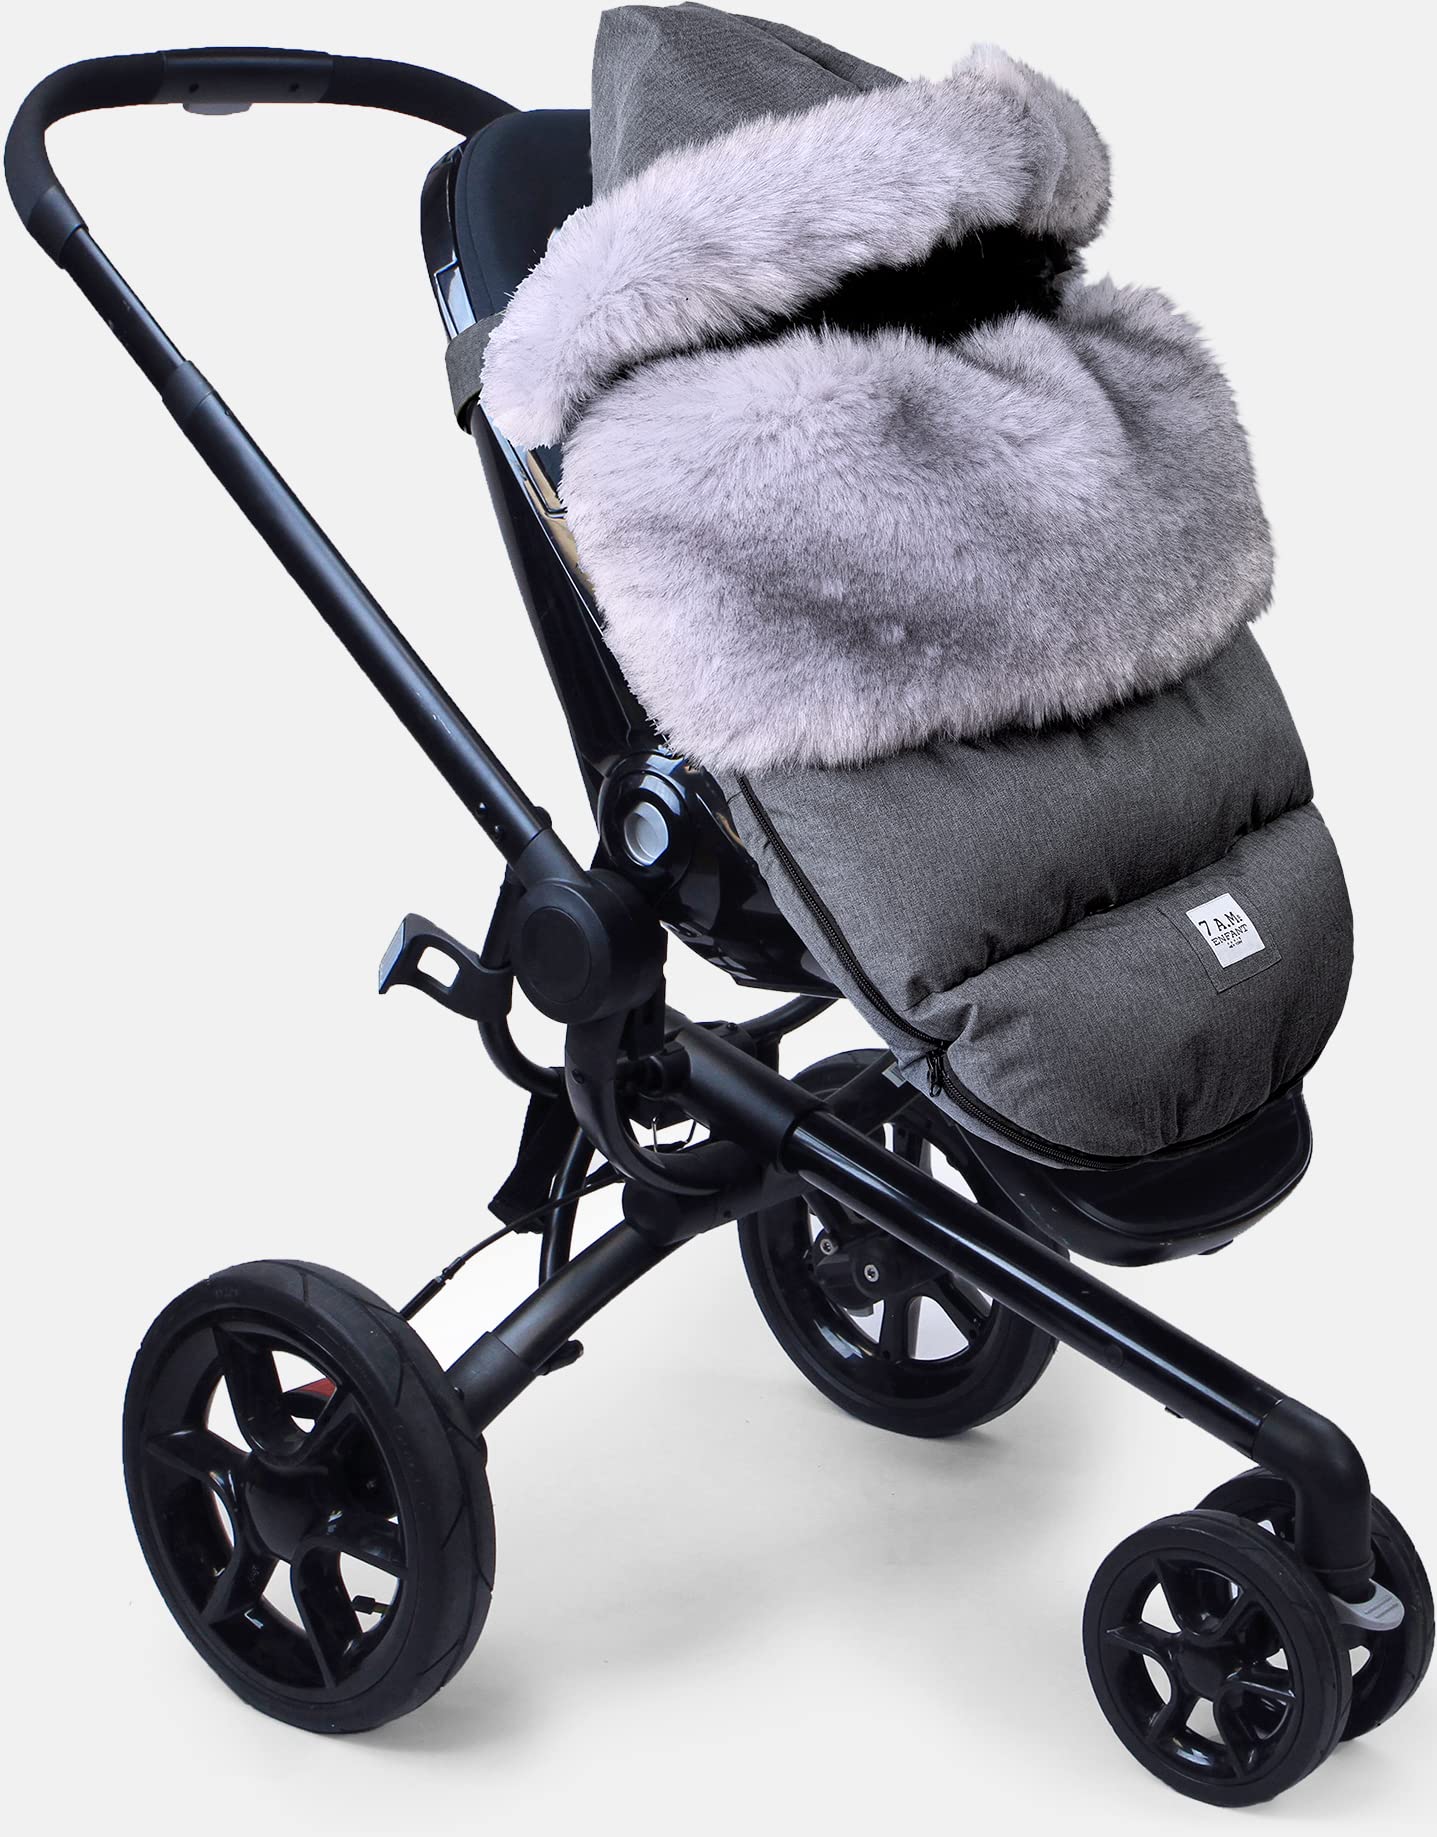 7AM Enfant Universal Stroller Footmuff - Water Repellent Winter Bunting Bag for Strollers & Car Seats, Soft Micro-Fleece & Plush lined Stroller Footmuff for Baby Boy & Girl | TundraPOD